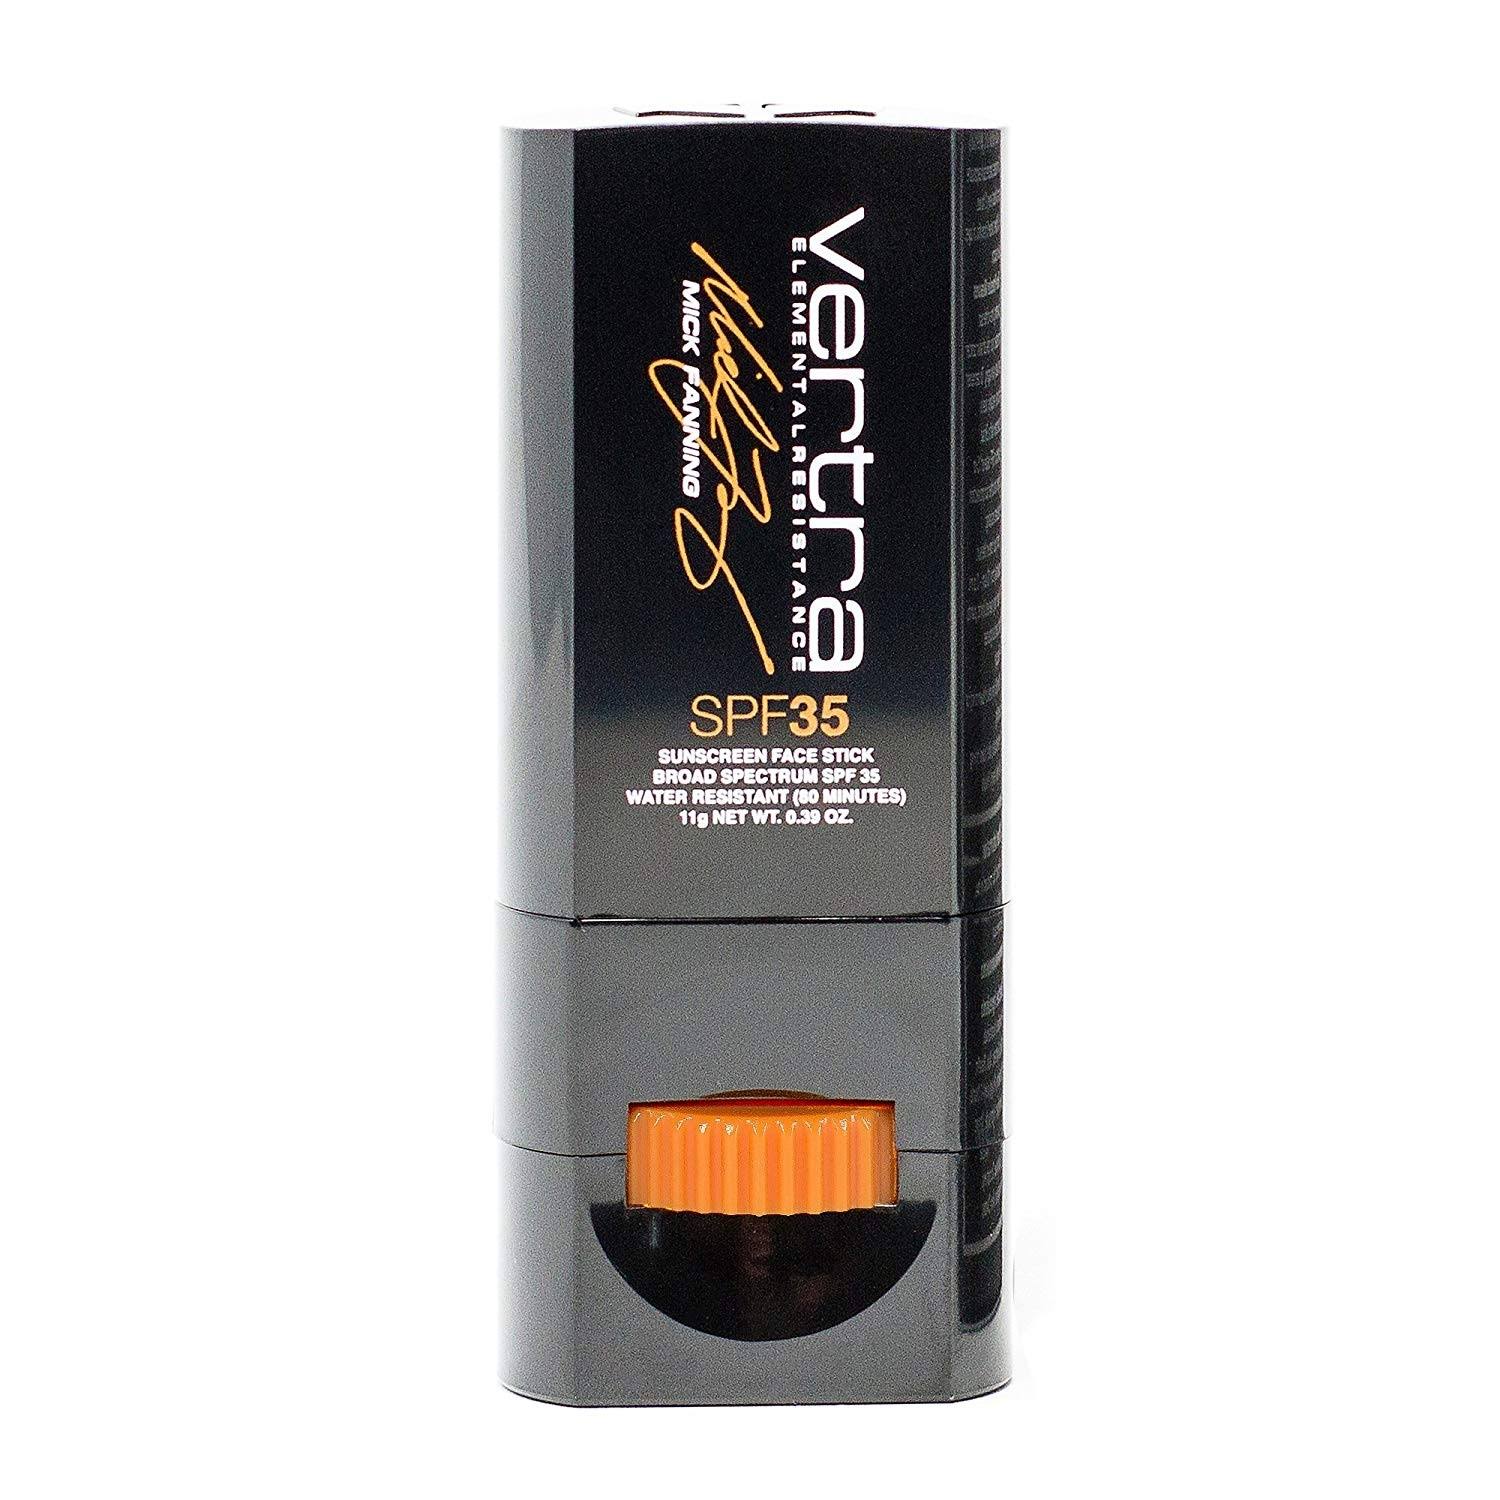 Vertra Mick Fanning Signature Face Stick - Cooly Beige, SPF 35